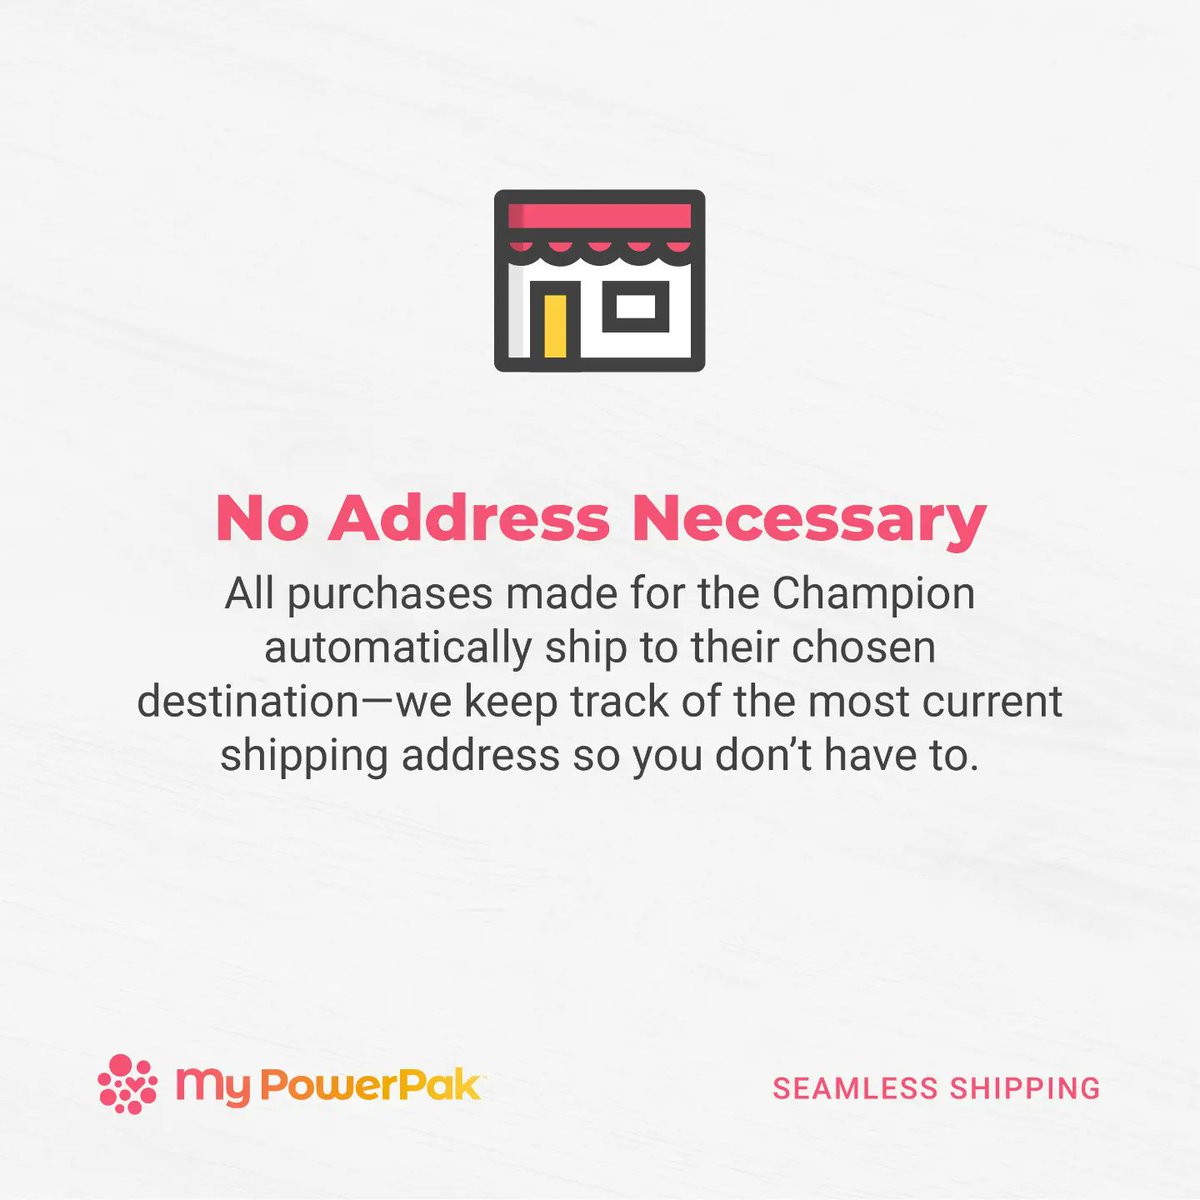 Amazing: A gift purchased for a Champion from our Marketplace will automatically be shipped to their current address on file. Don't worry whether they're at home, in a care facility or elsewhere. mypowerpak.com
#Caregiving
#Features
#ShippingMagic
#SeamlessShipping